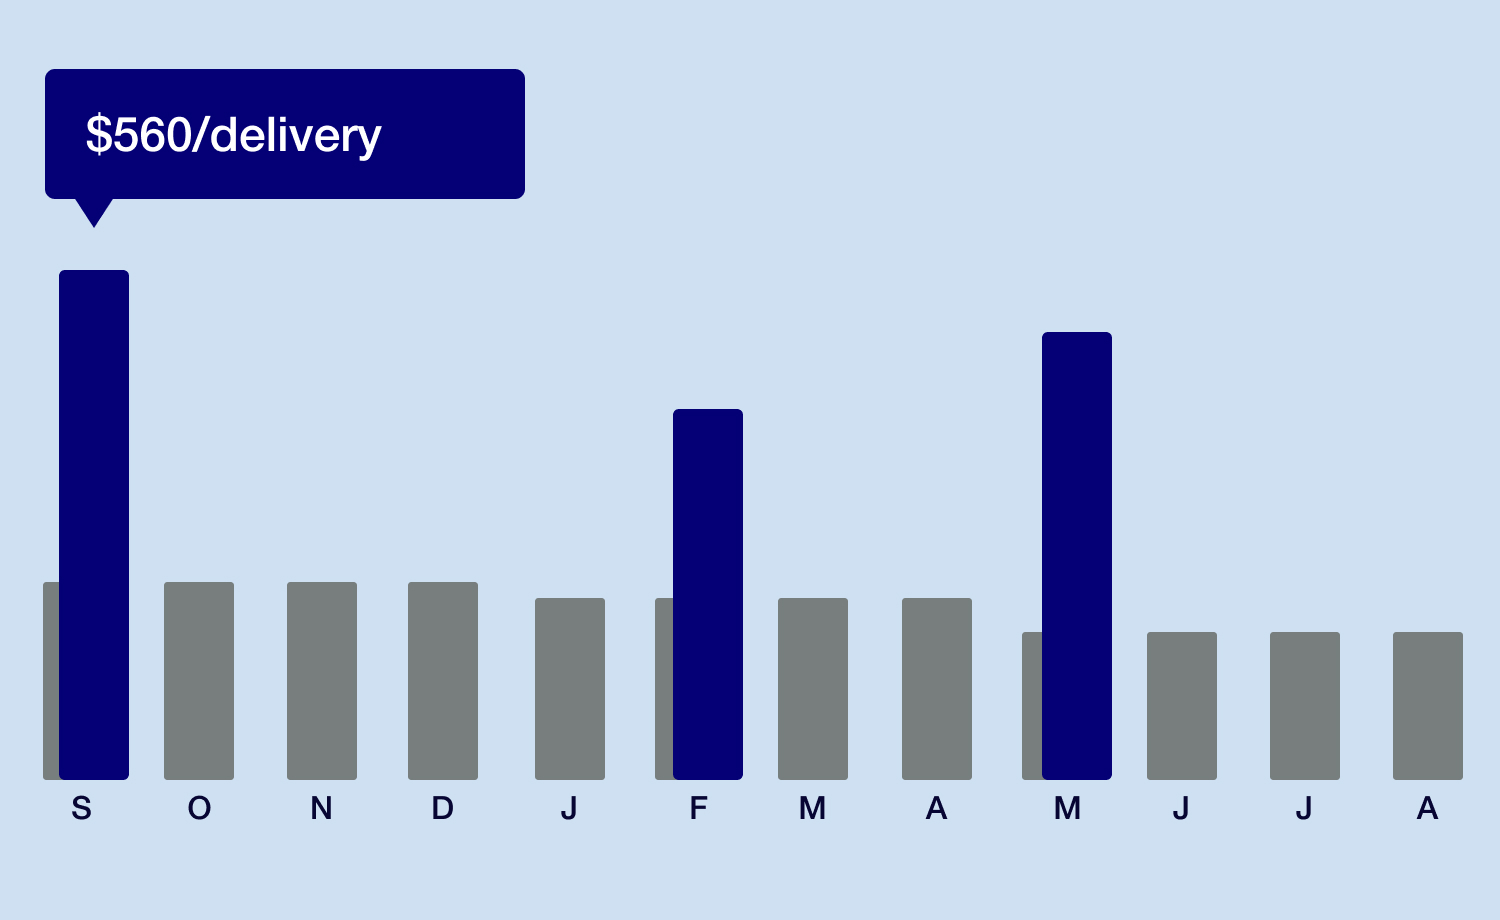 Bar graph comparing pay per month to pay per delivery, showing that pay per delivery results in variable payments based on your monthly usage. Where as pay per month standardizes the monthly payments.